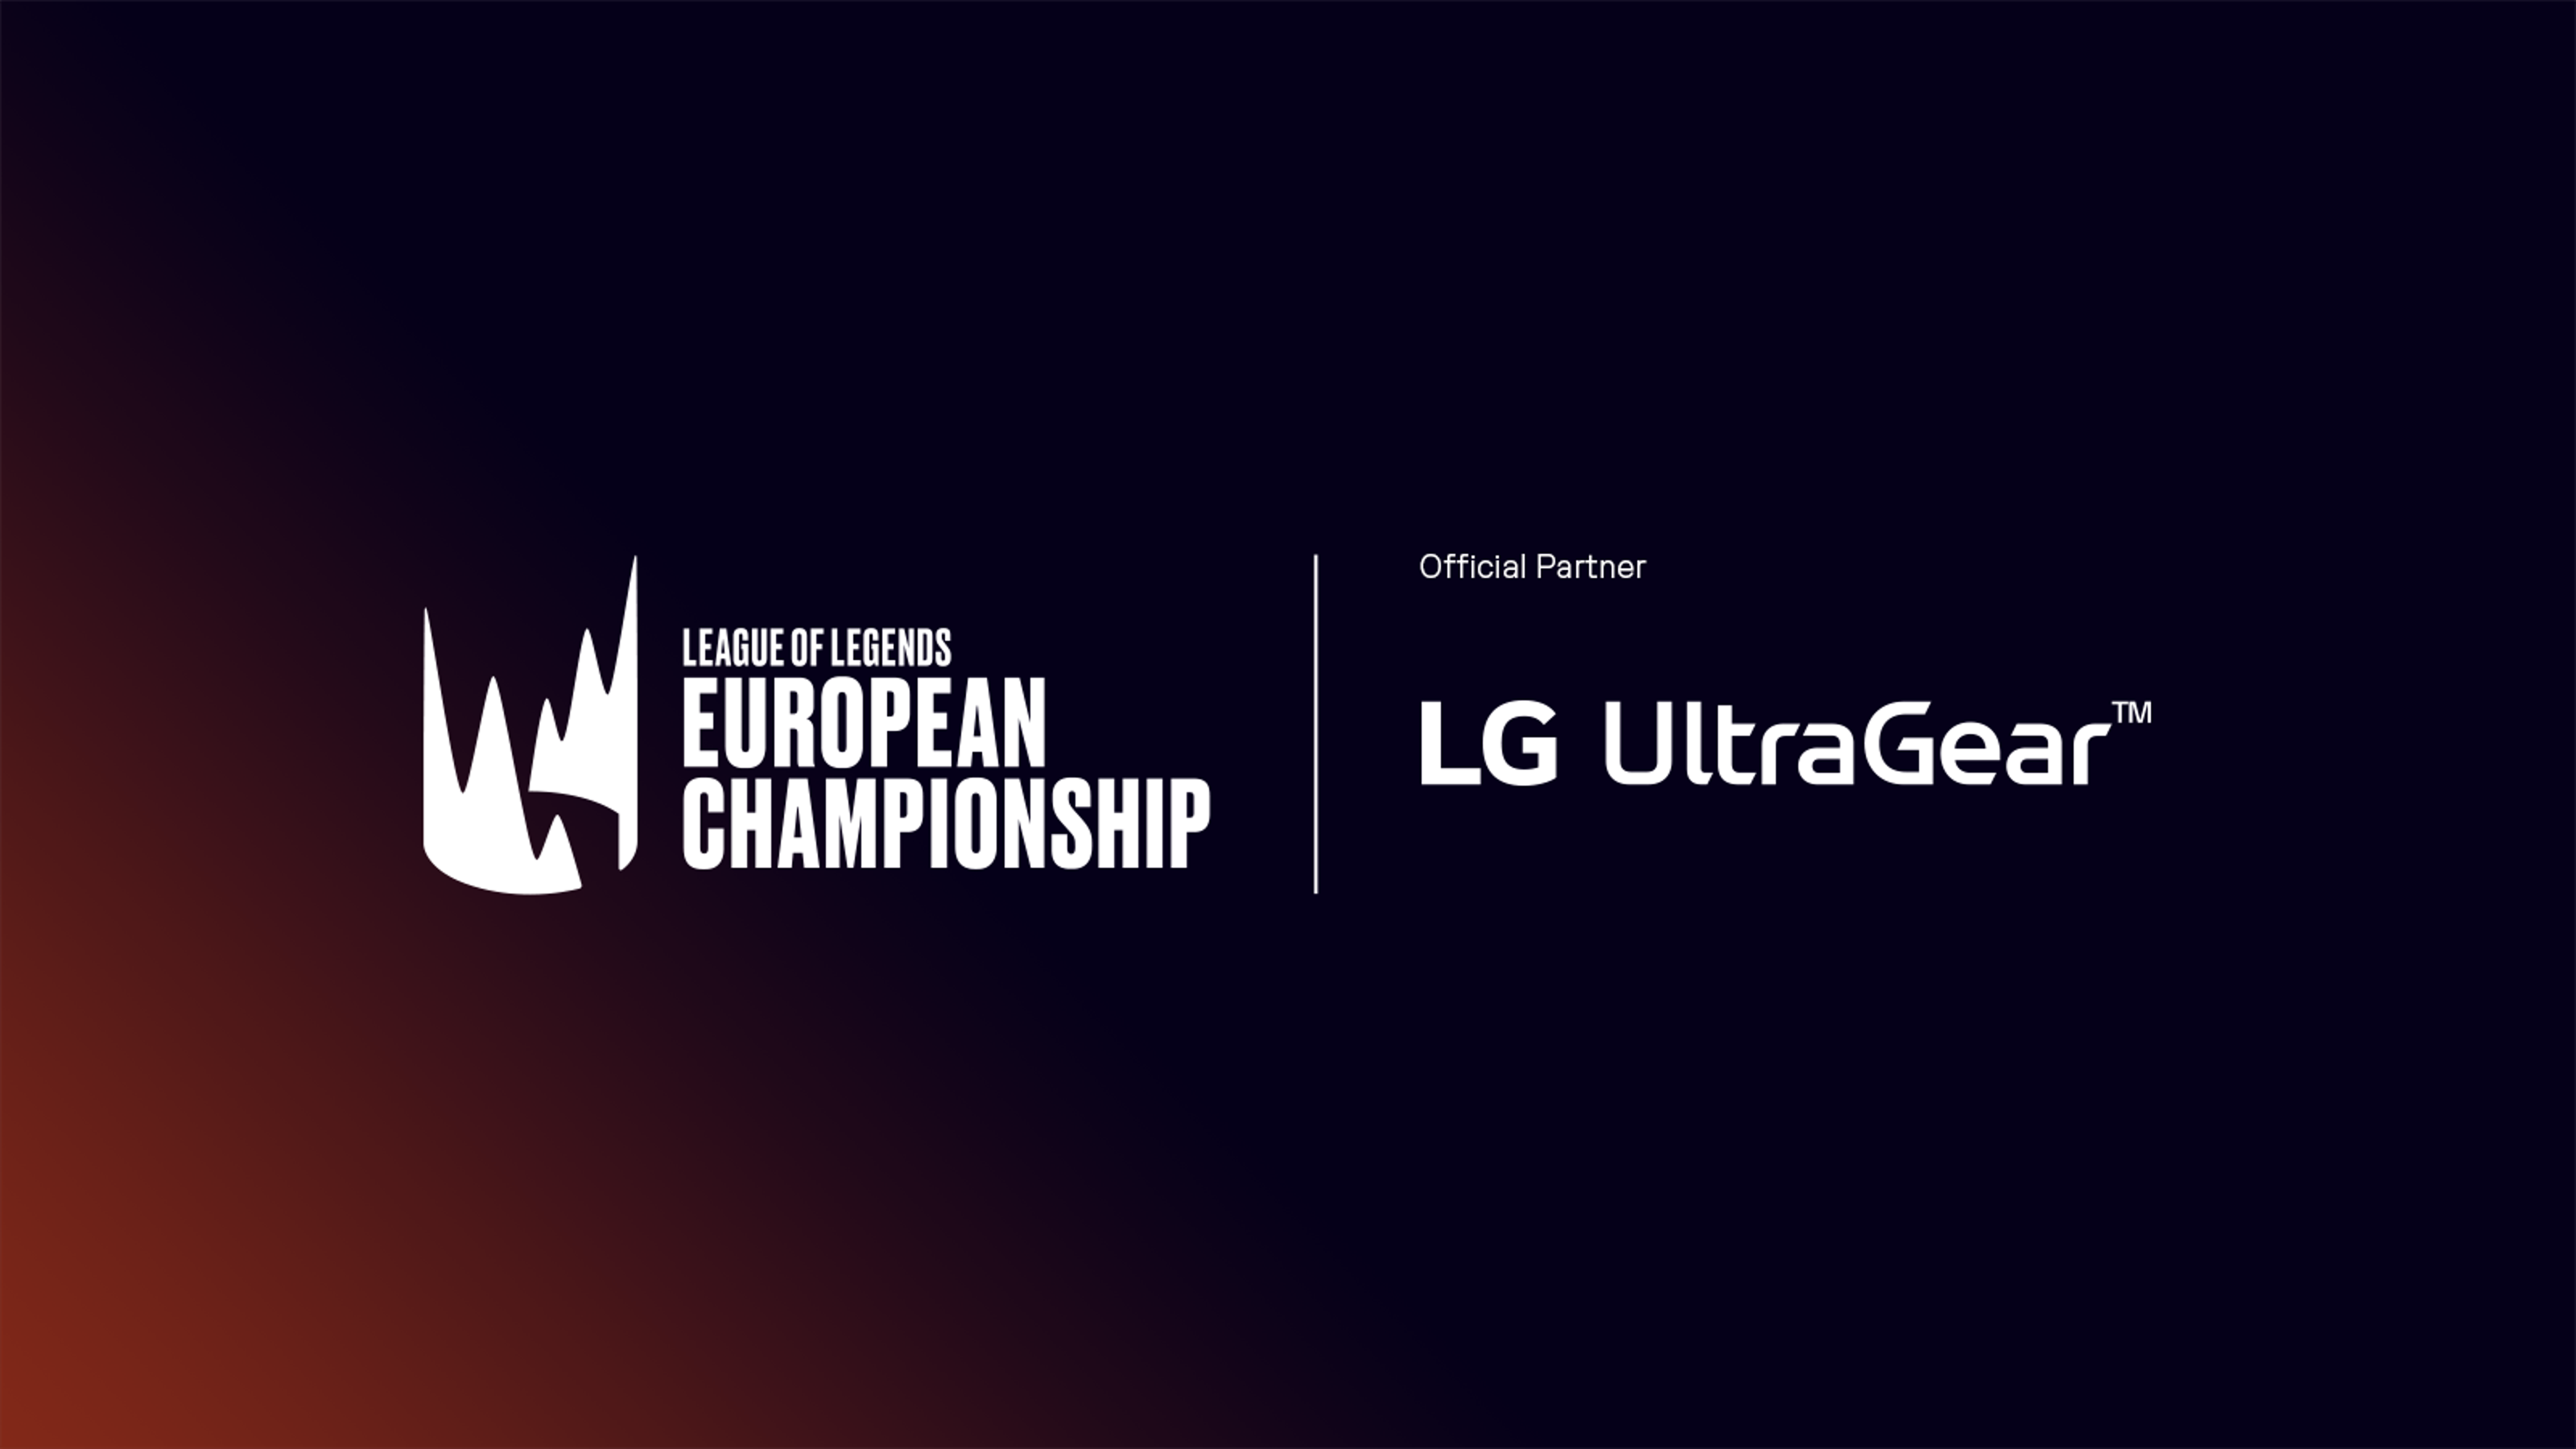 LG UltraGear will continue to be an official monitor partner for LECs in 2023.